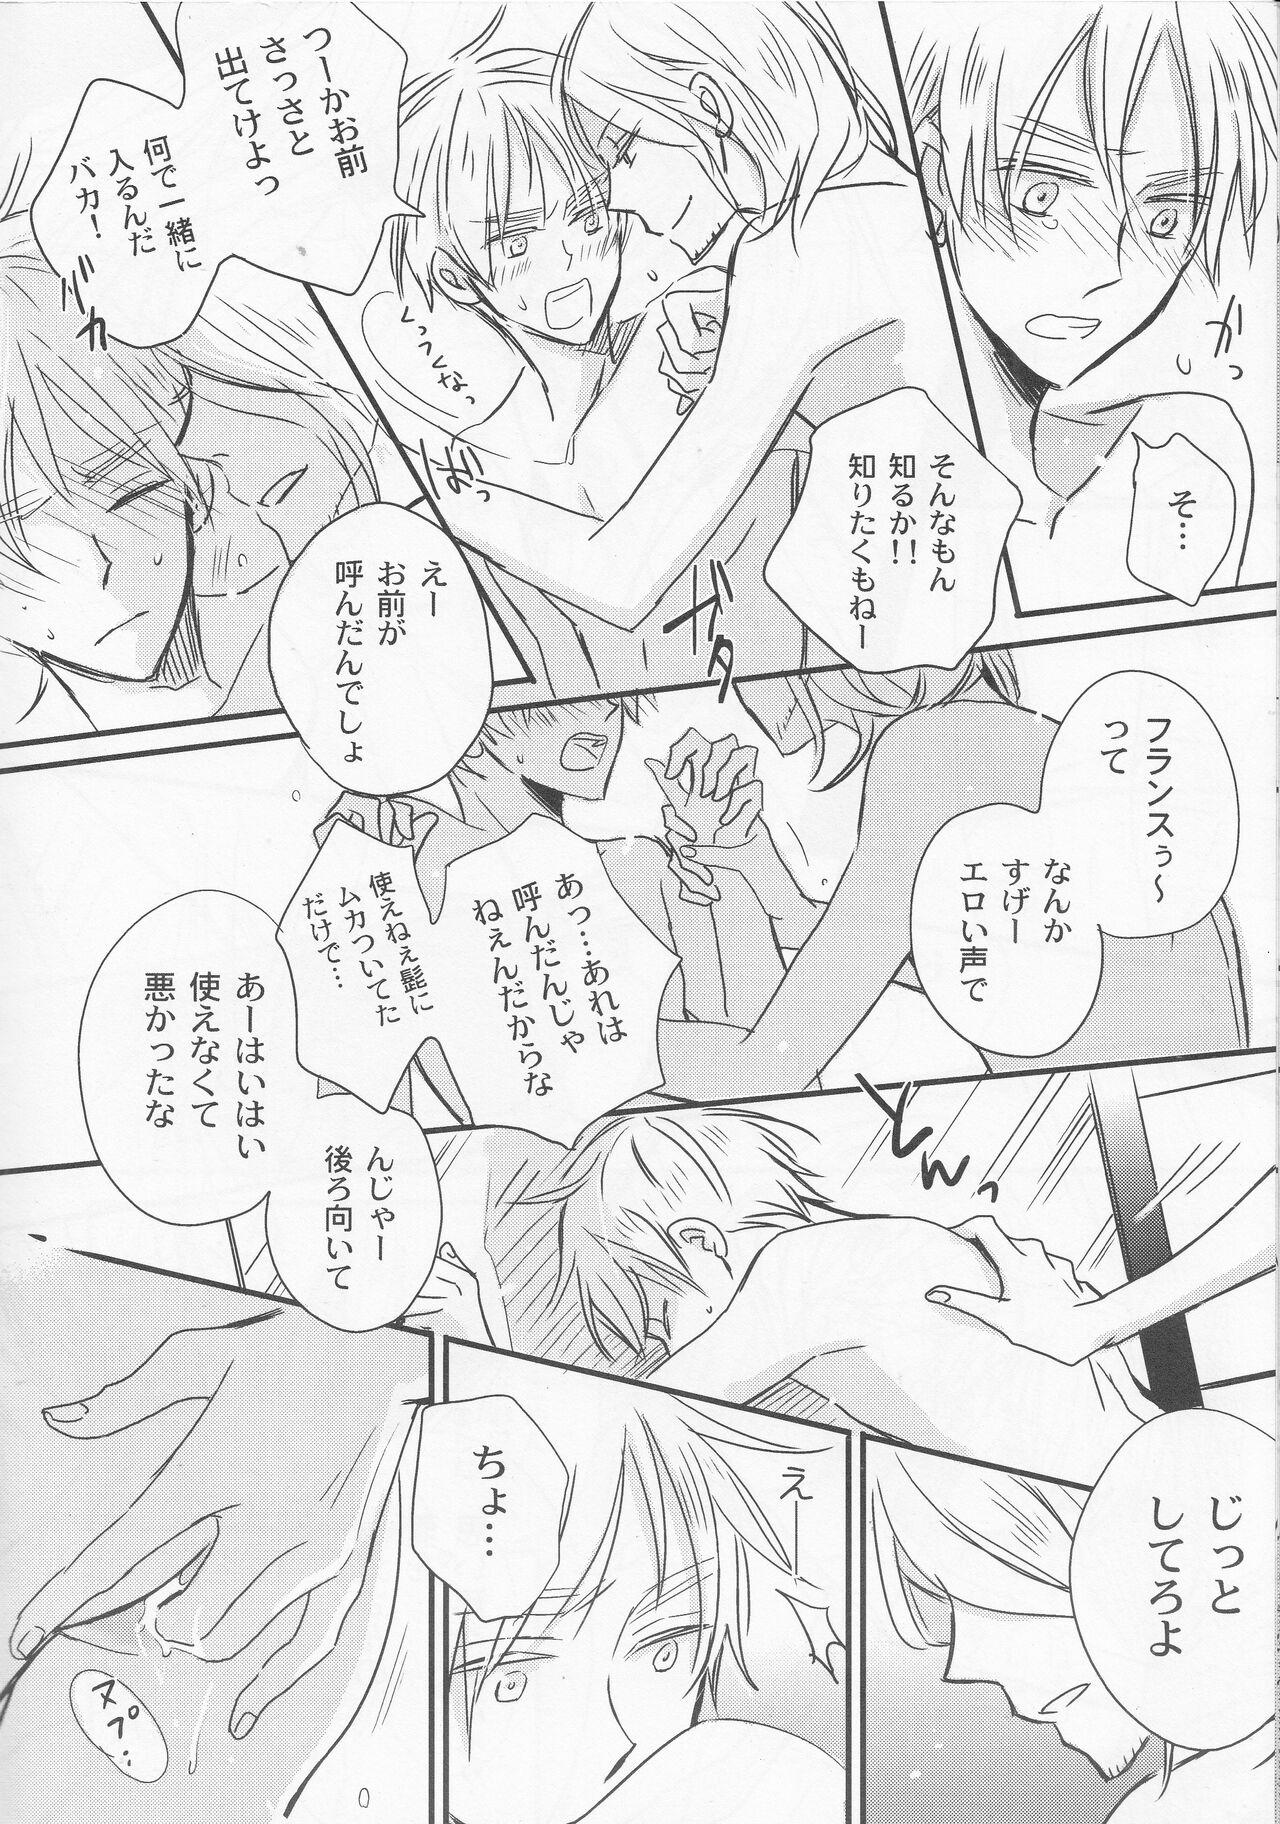 Gay unknown title - Axis powers hetalia Spanish - Page 11